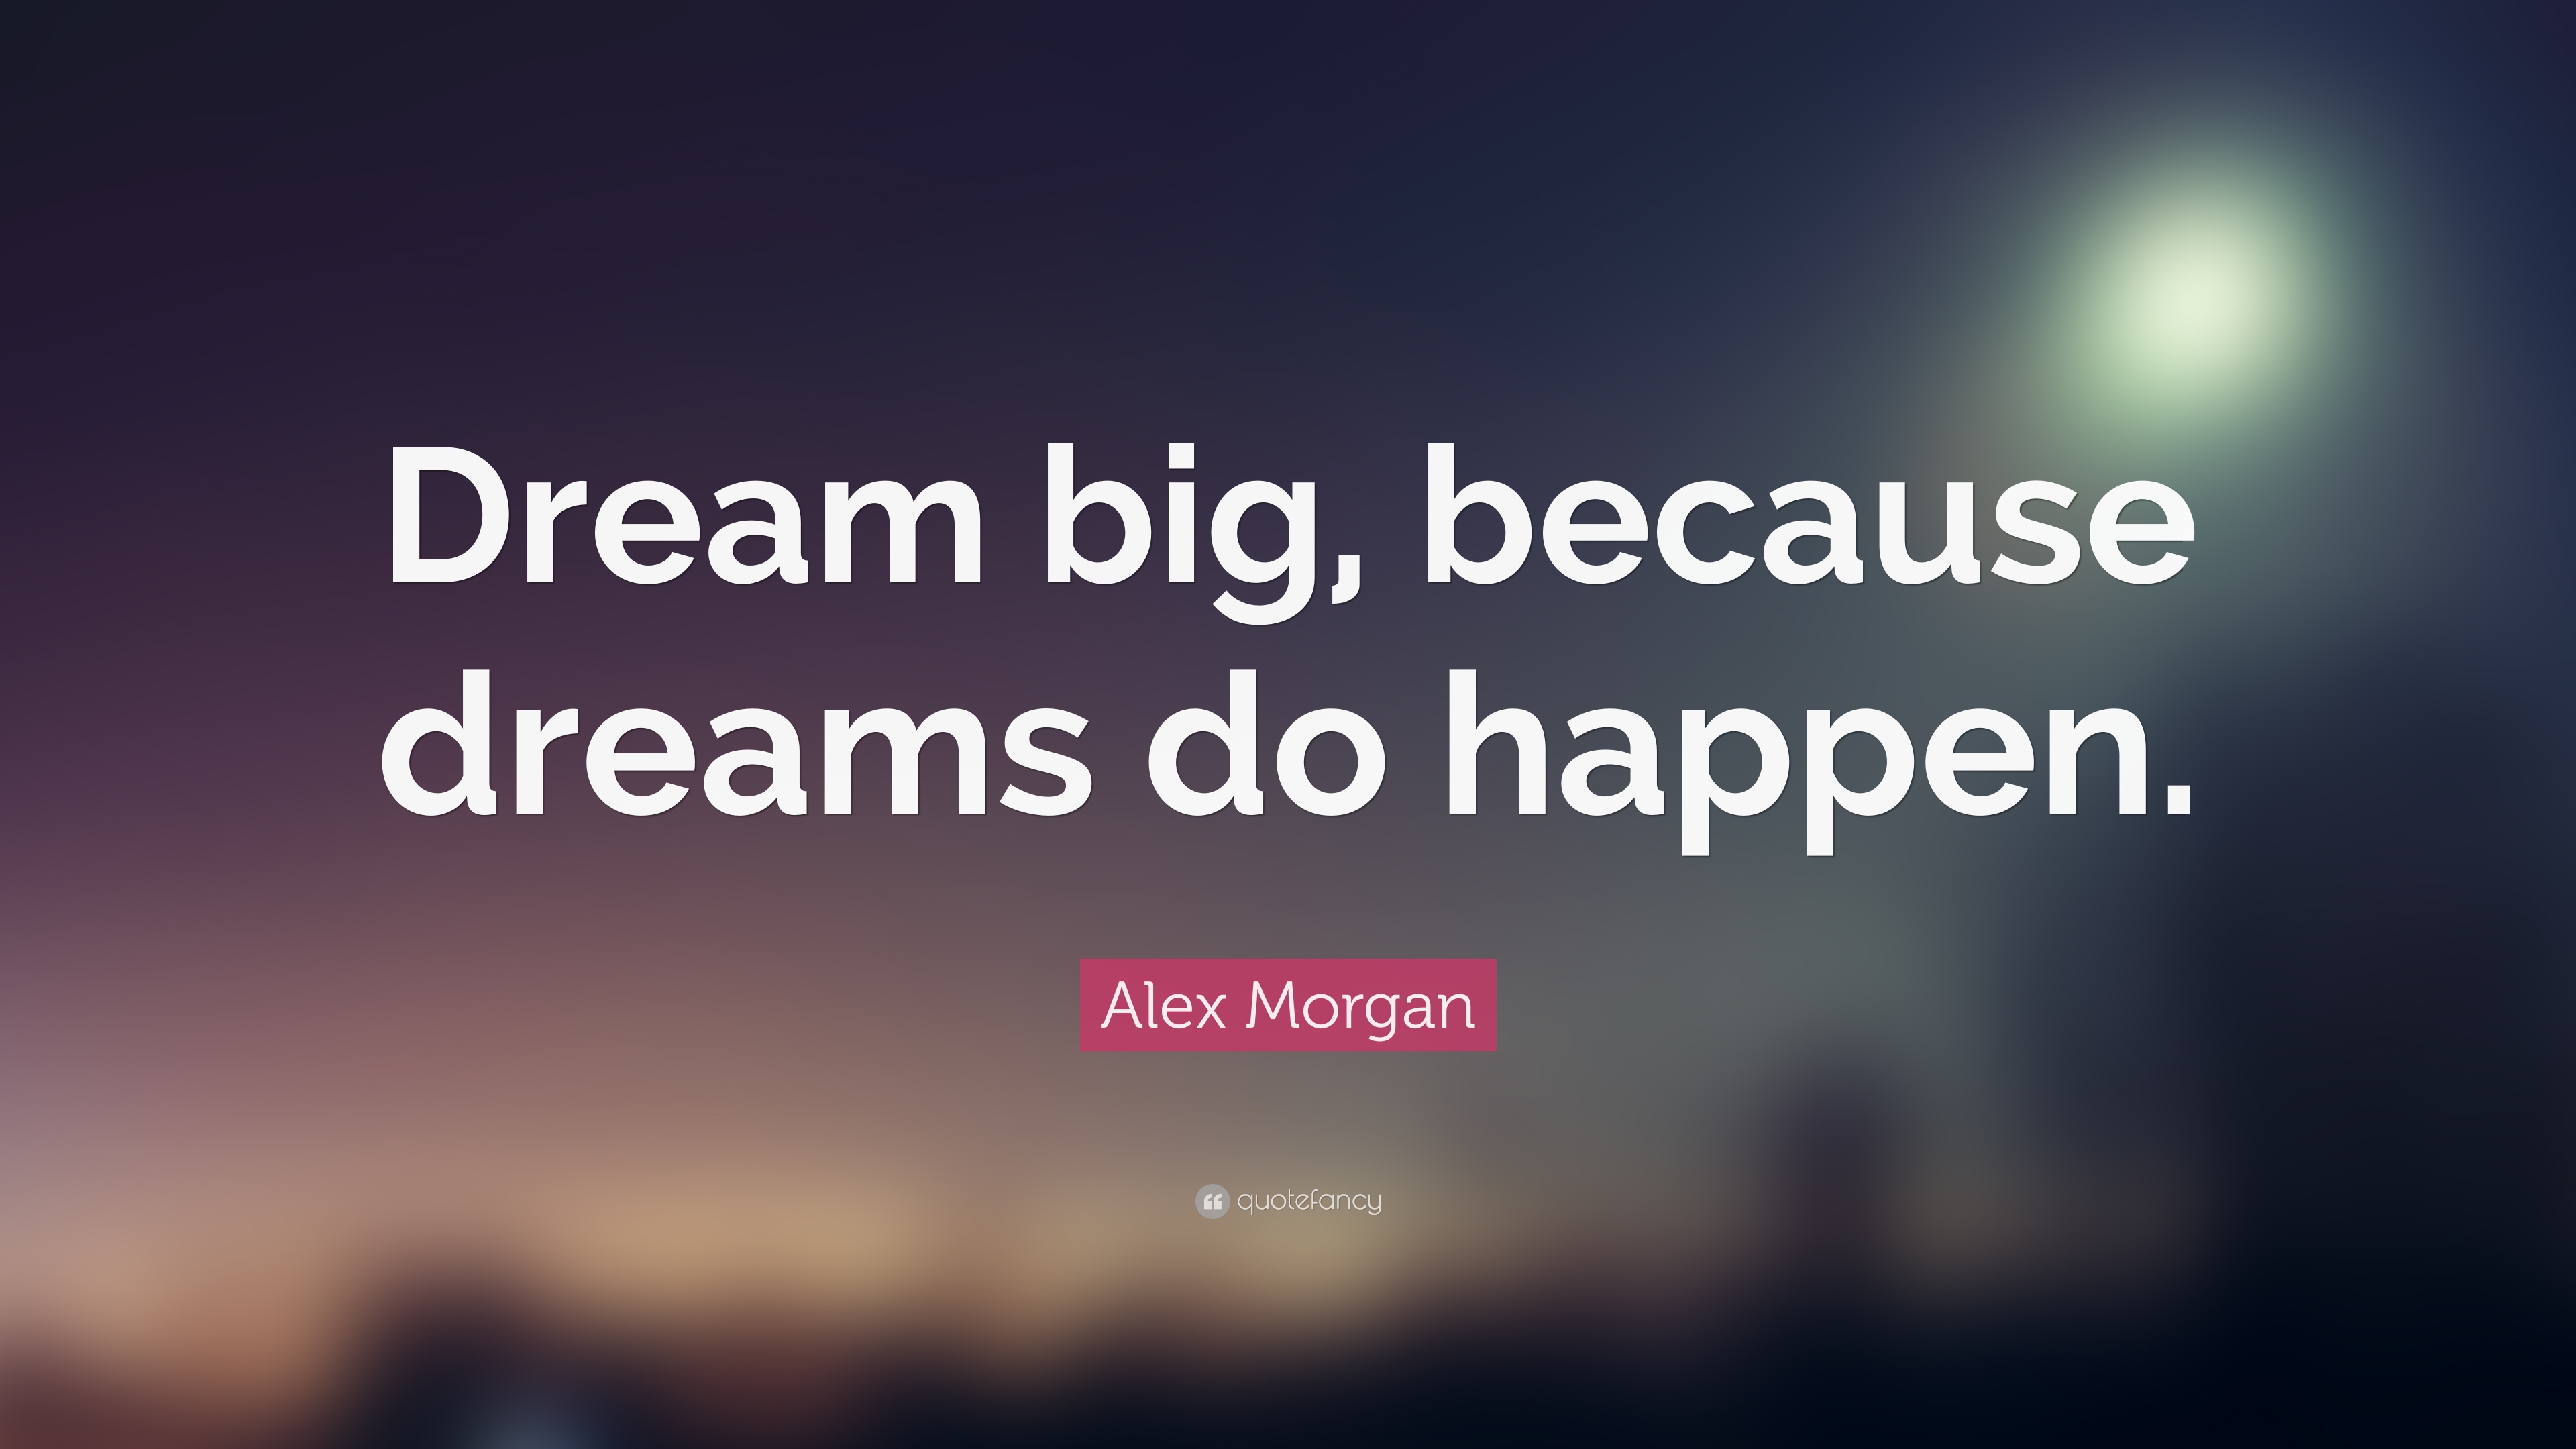 Quotes About Dreams - Proactive Quotes - HD Wallpaper 